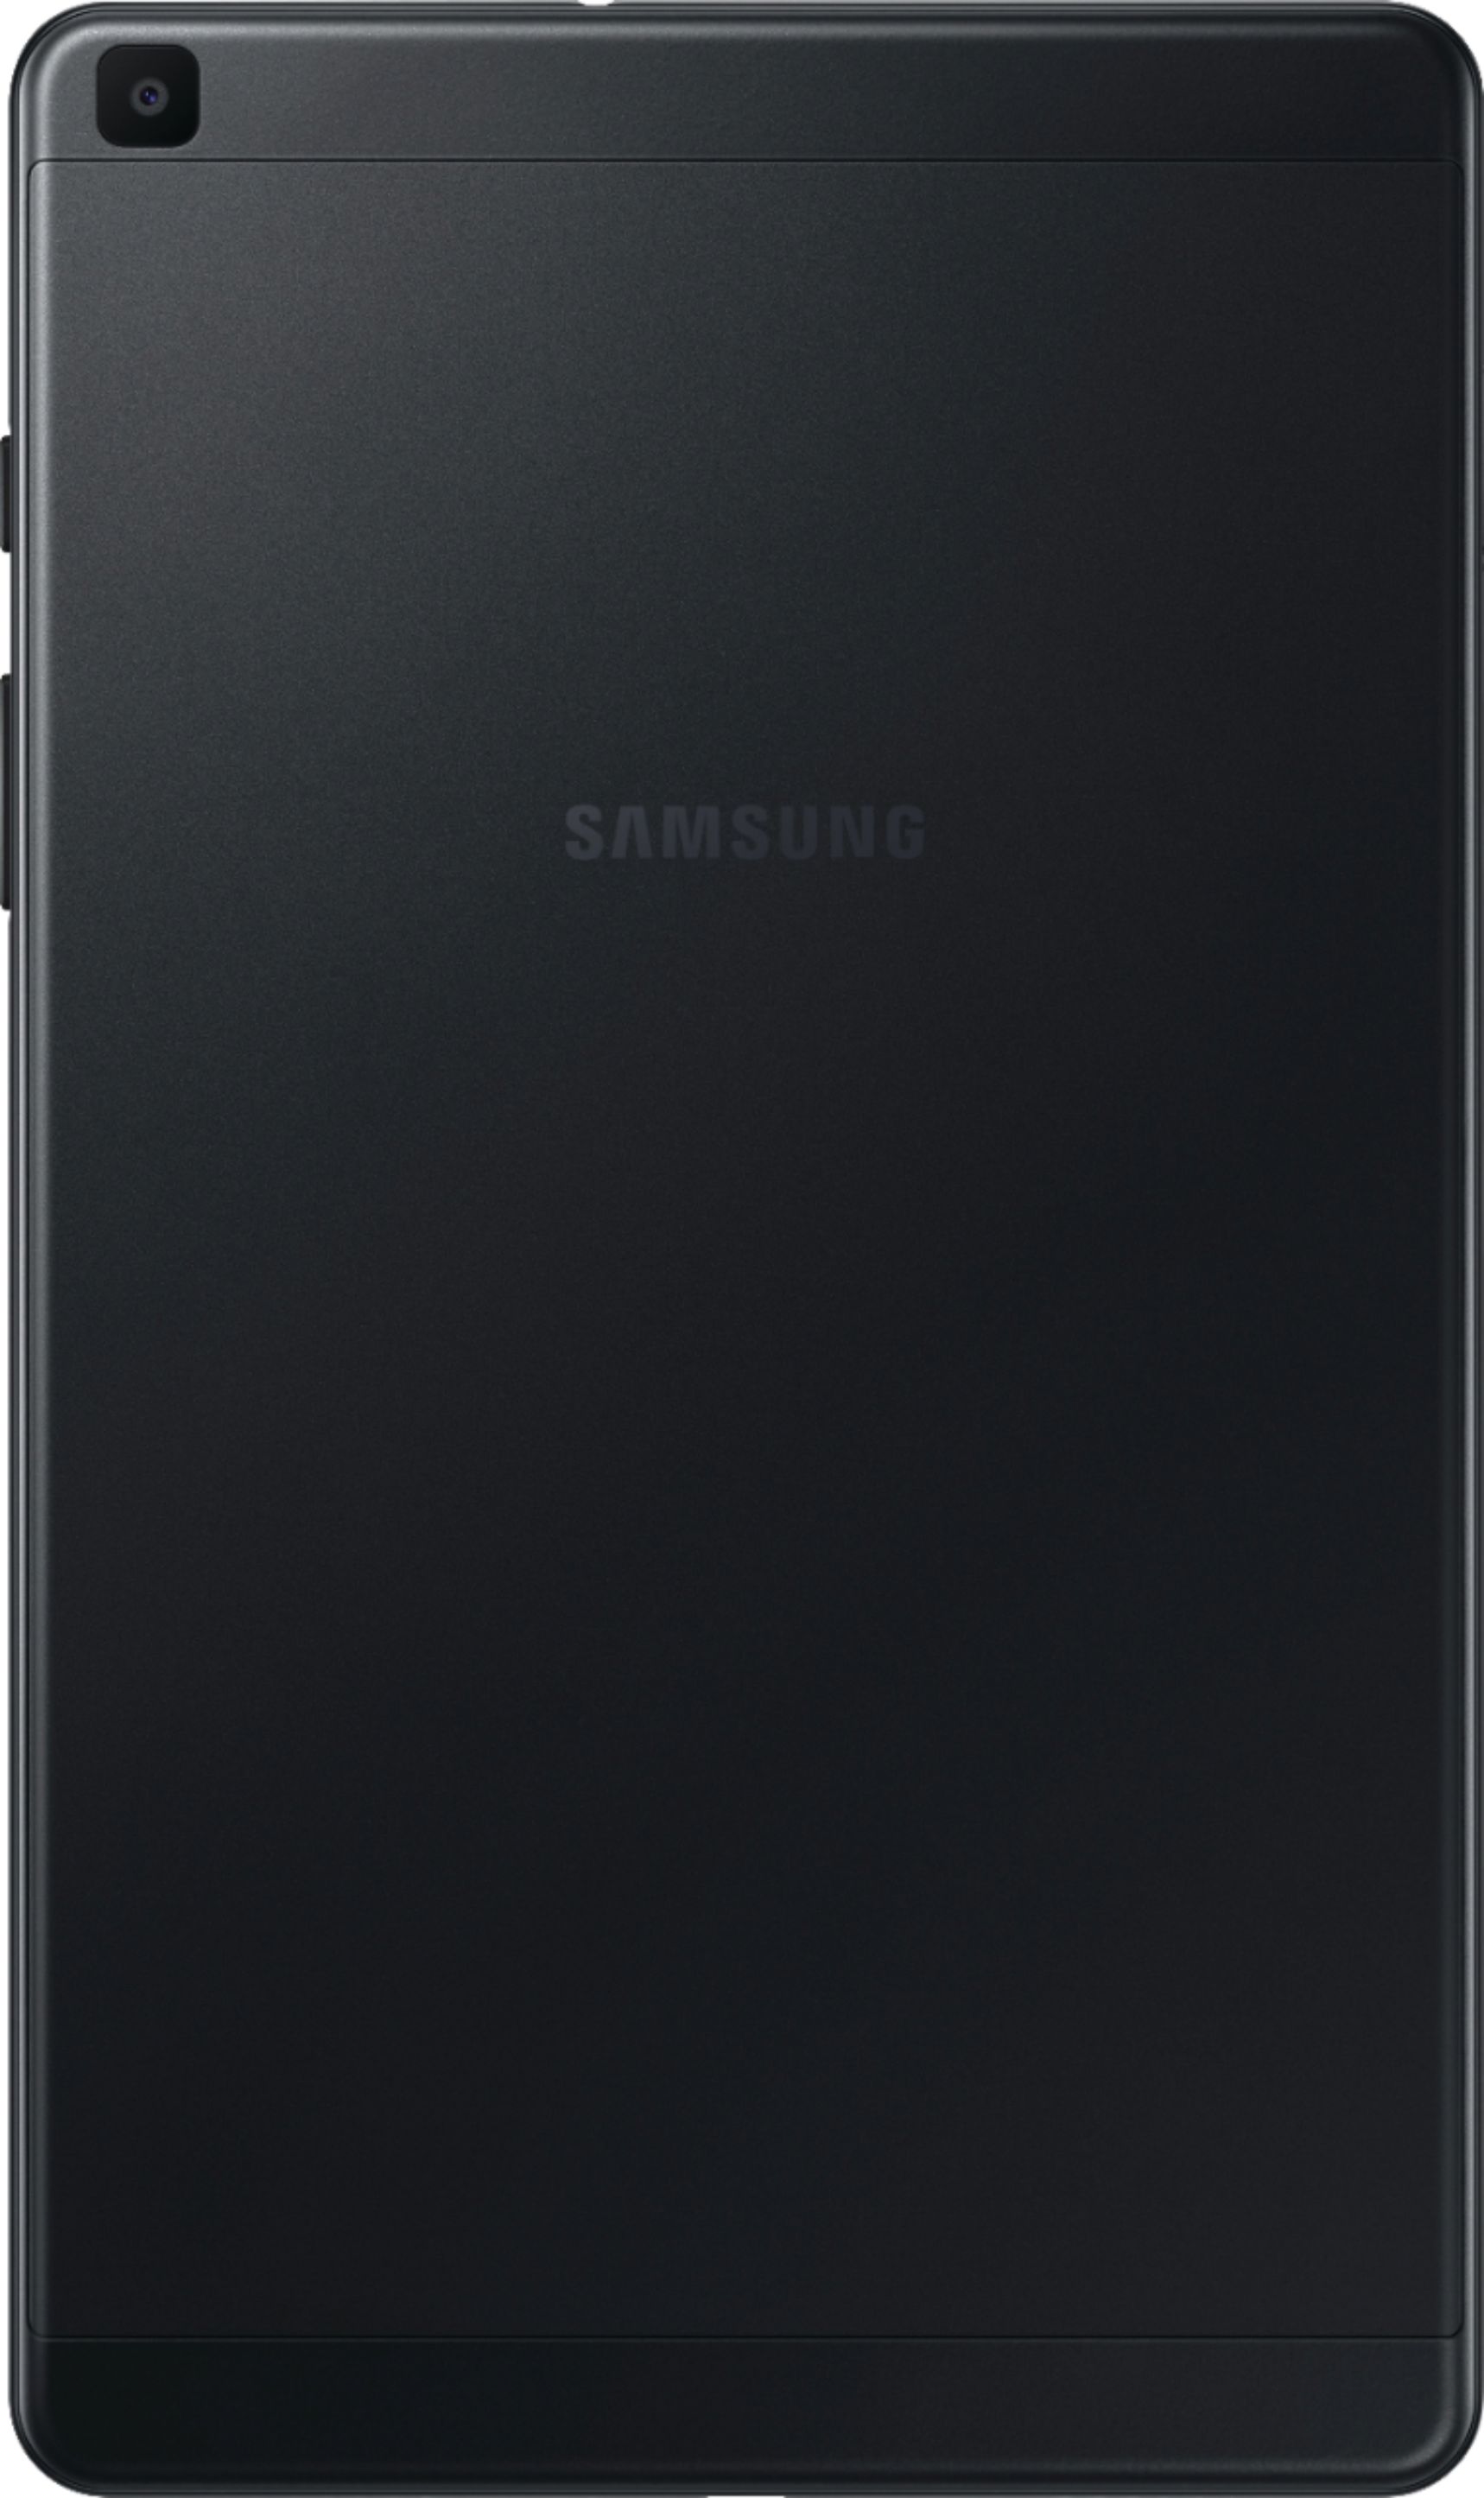 and Built for Lifetime of Constant Use! 2019 MIXZA Performance Grade 32GB Verified for Samsung Galaxy Tab A 8.0 UHS-I3.080MBs MicroSDHC Card is Pro-Speed Heat & Cold Resistant 